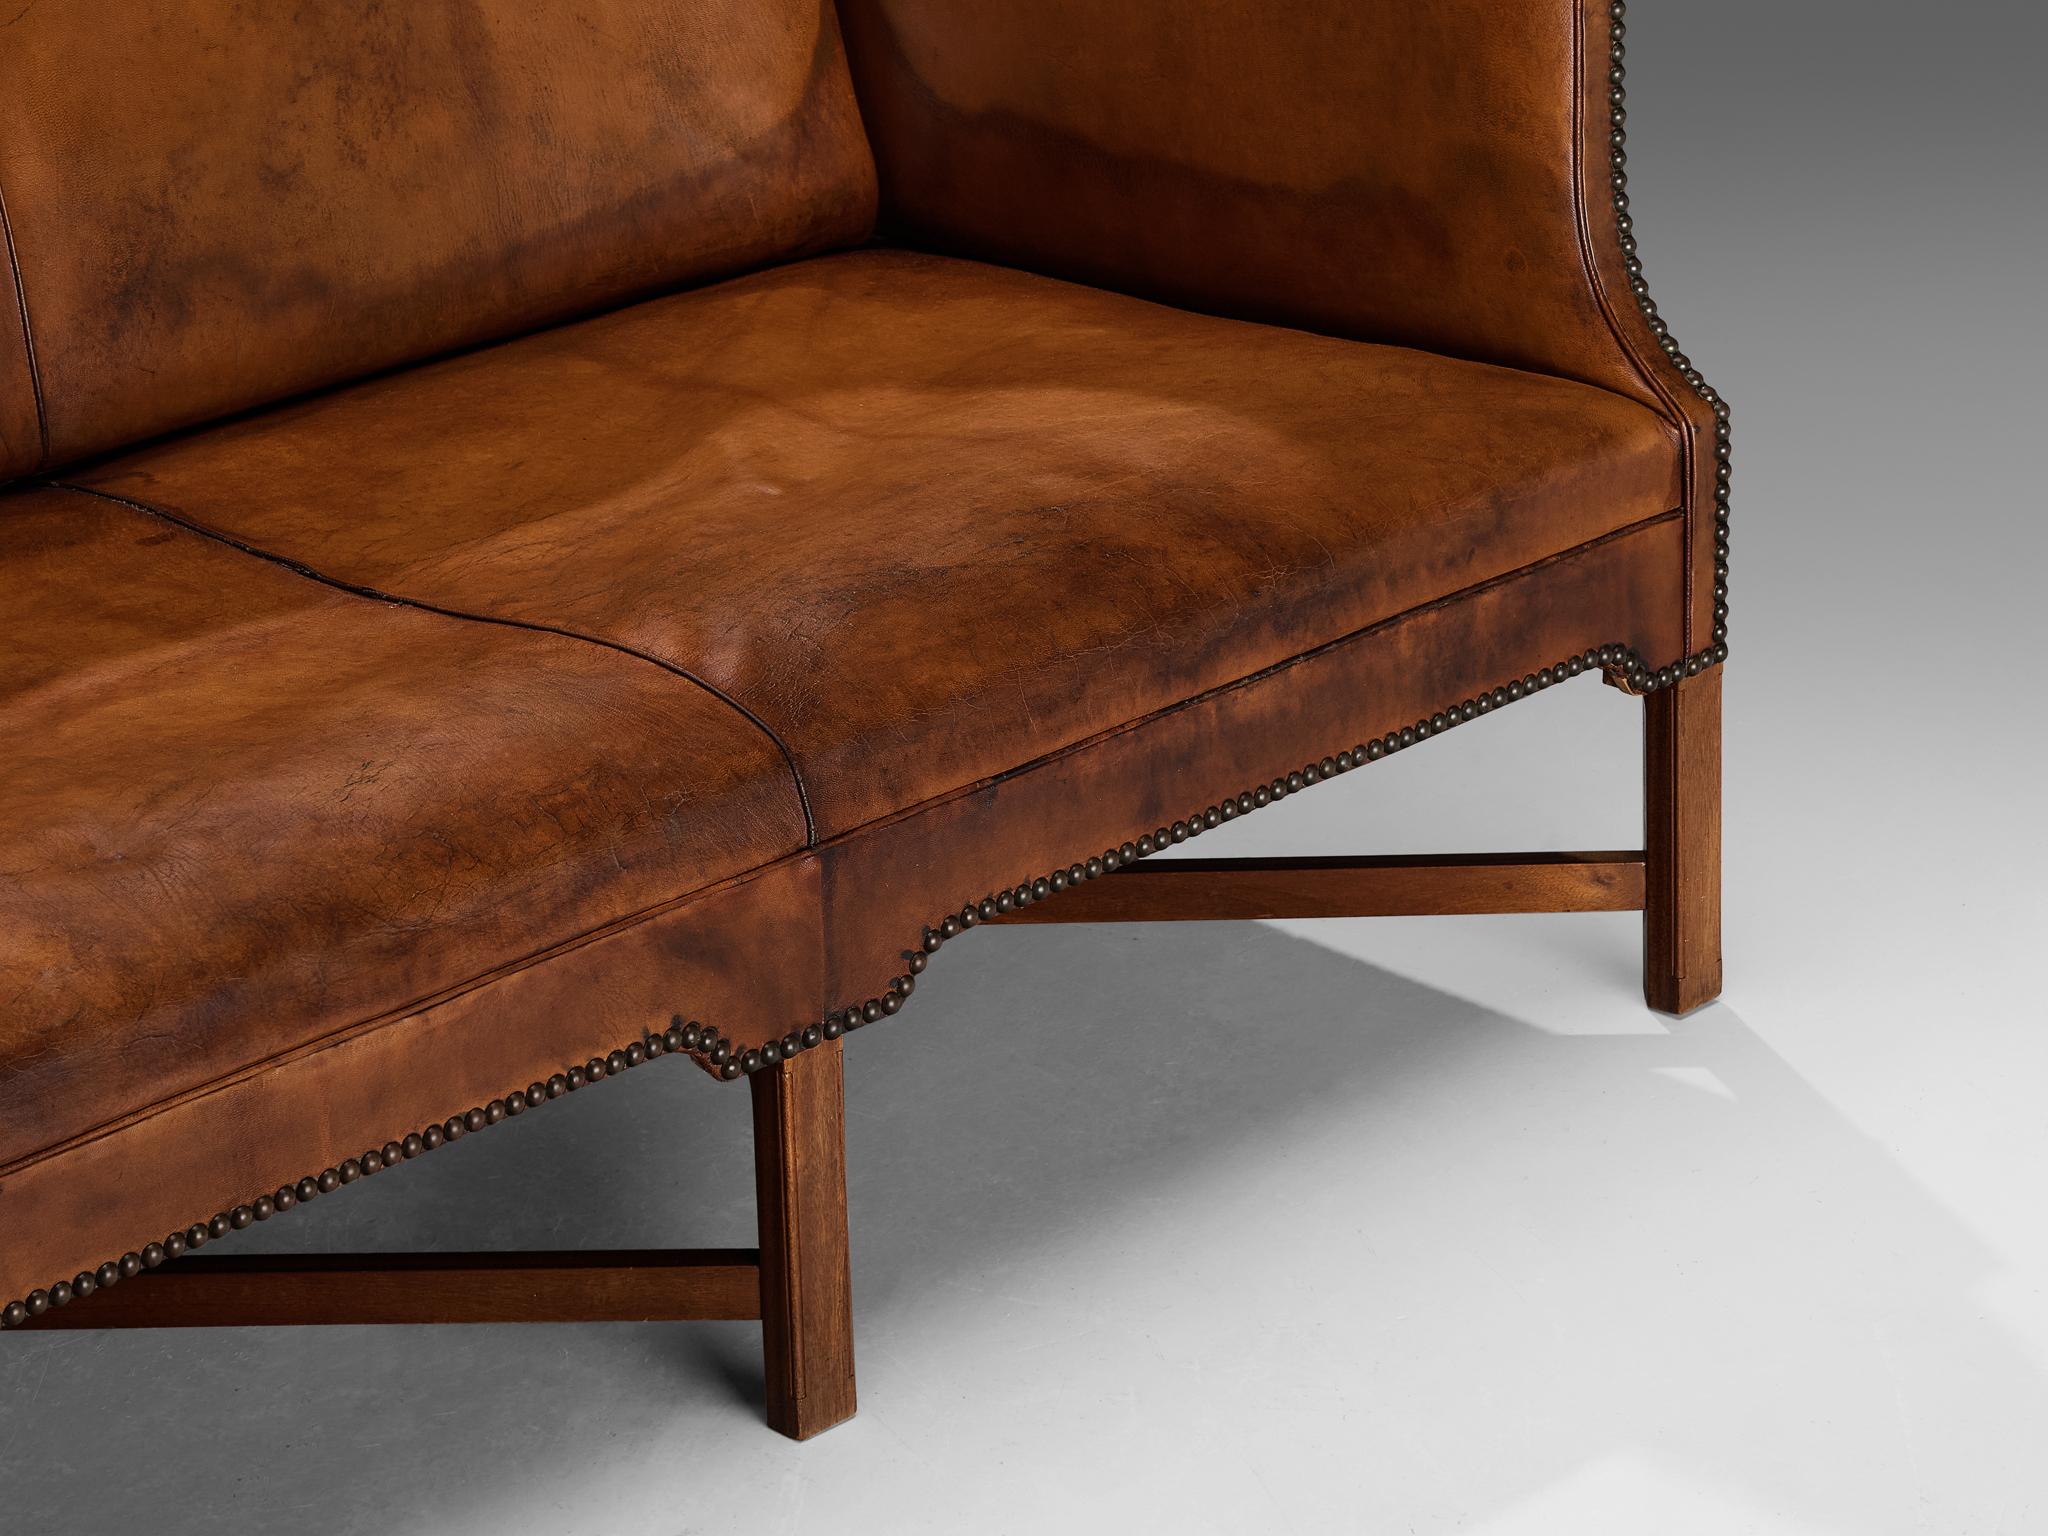 Kaare Klint for Rud Rasmussen Sofa in Original Niger Leather and Mahogany  For Sale 1